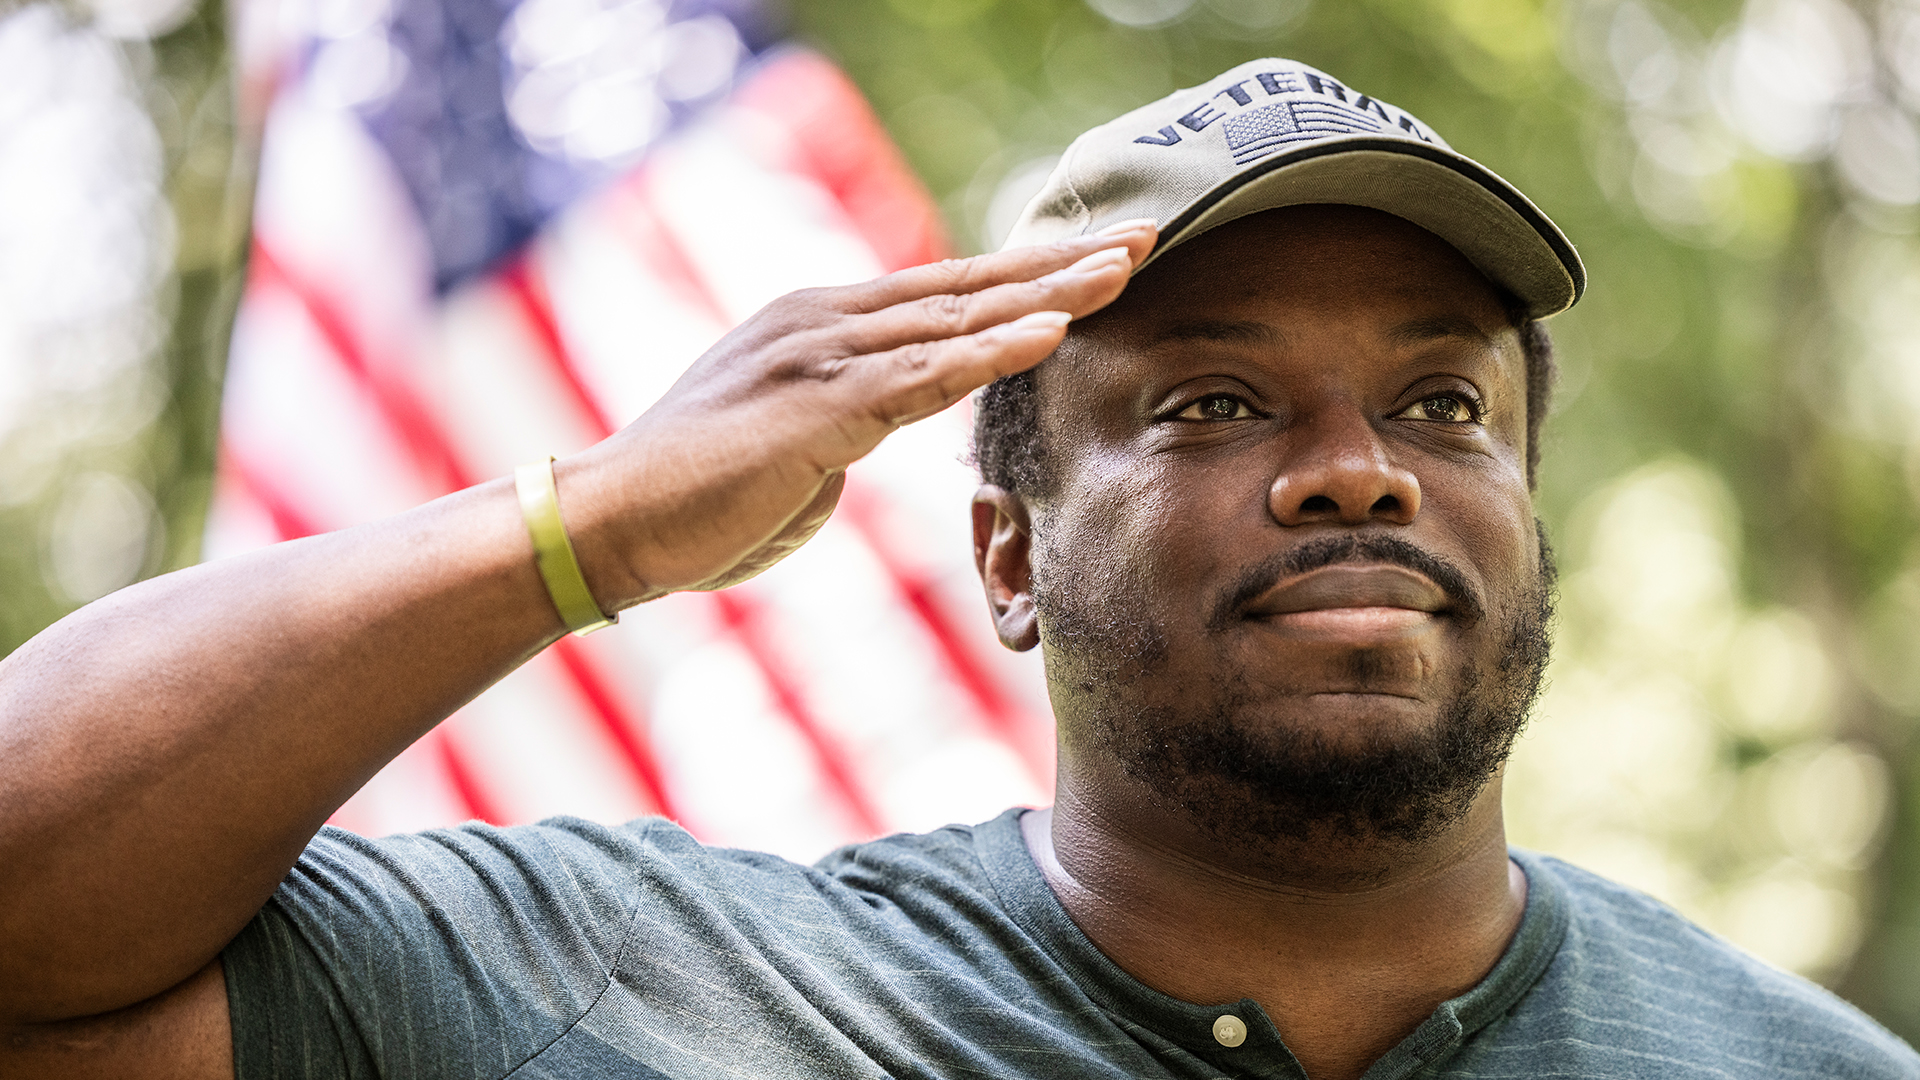 Military Veteran giving a salute in front of the American flag